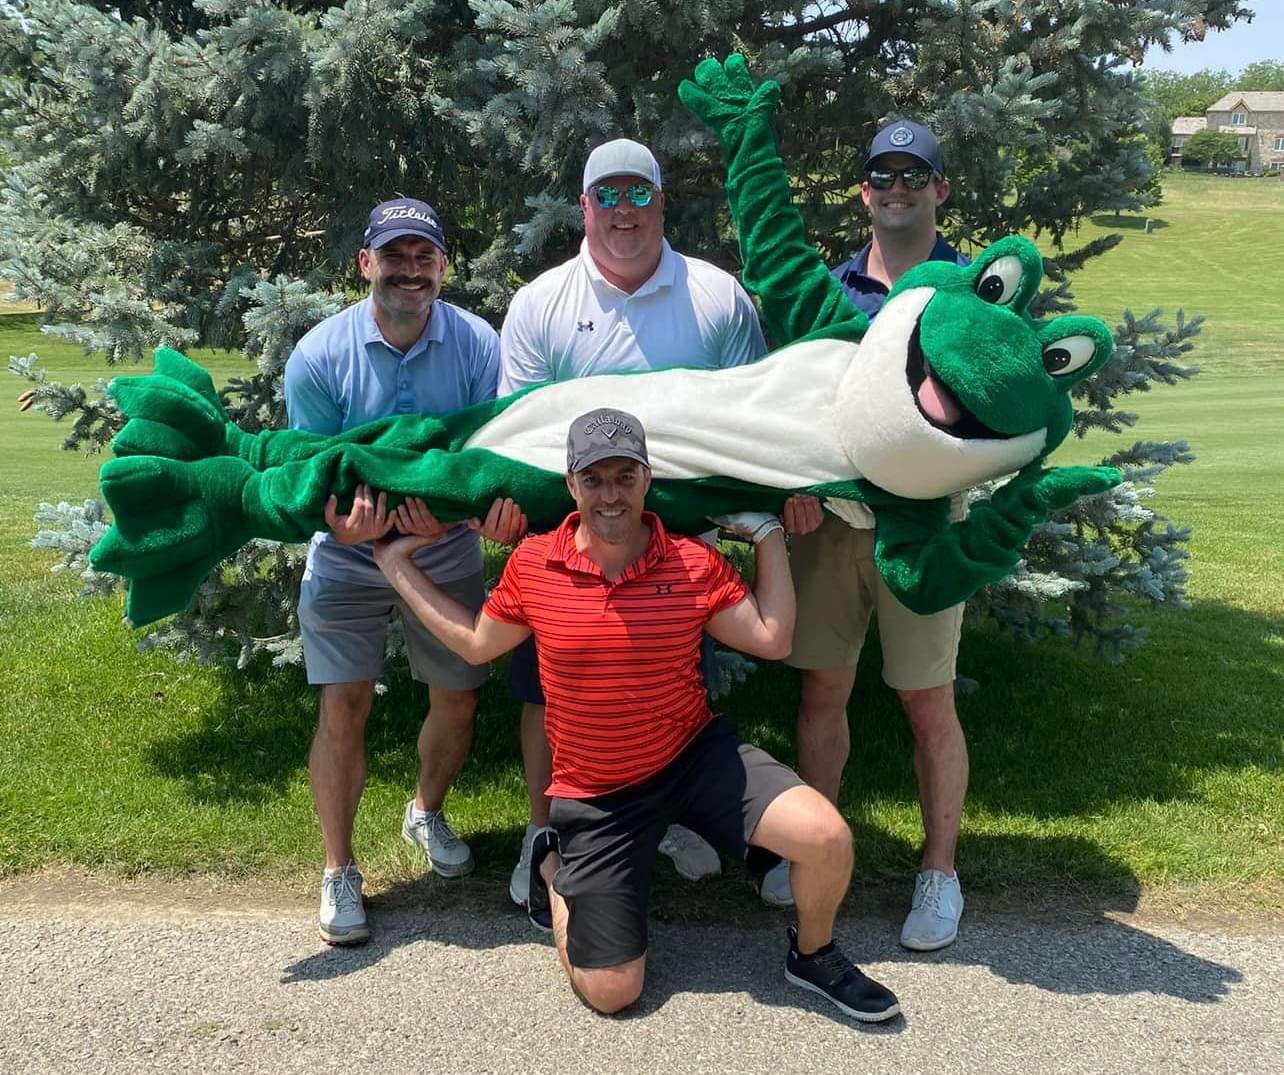 4 men and, Chuckles, the Bags of Fun mascot, posing for a picture on the golf course path with a tree behind them. One person in a red shirt is kneeling on one knee in the middle and has his hands up at his shoulders because he is helping to hold up chuckles, who is lying horizontally across the kneeling mans hands. There are 3 men behind Chuckles and they are all holding him up as well.